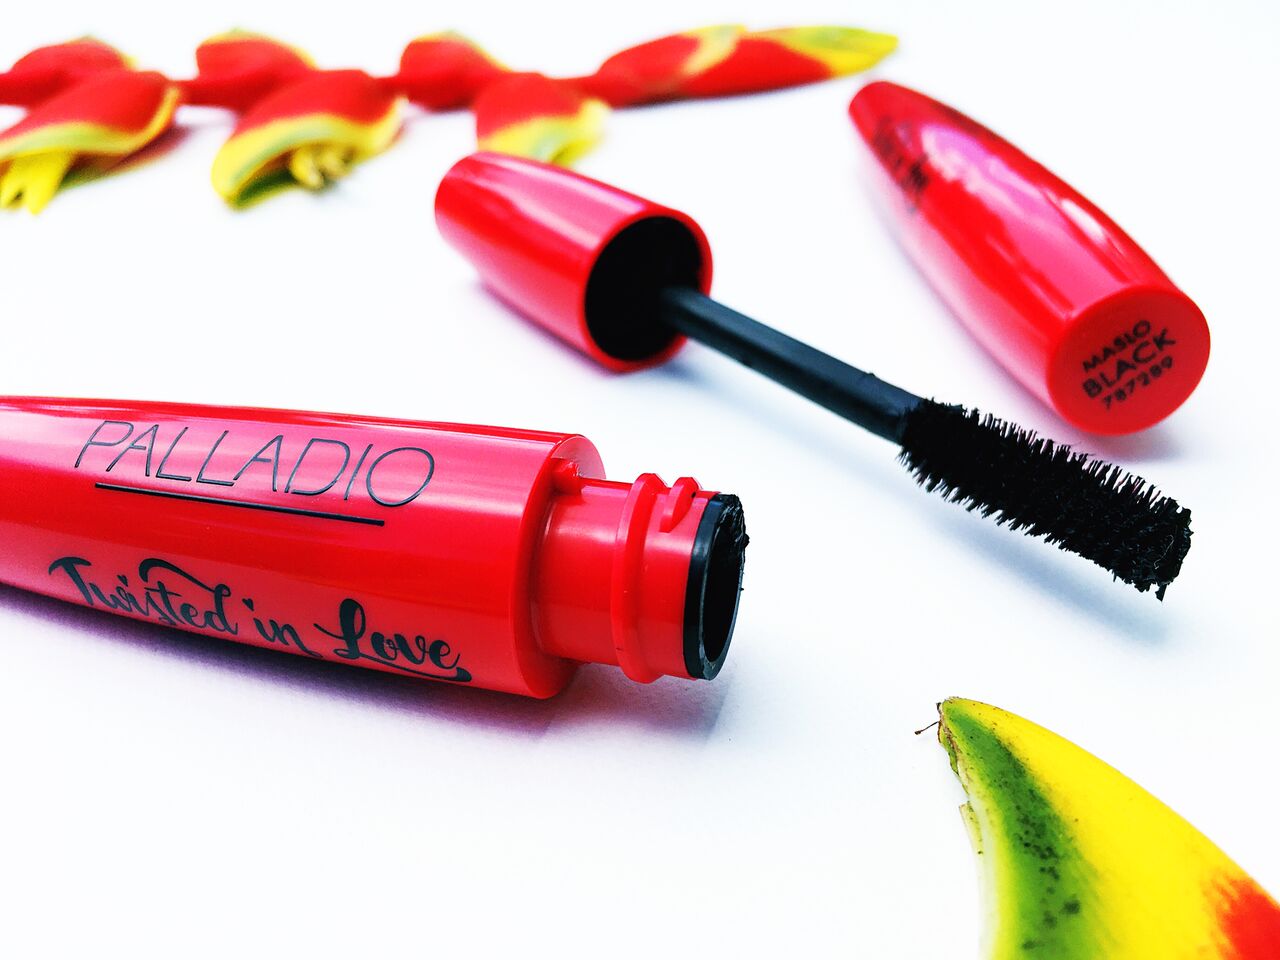 Tired of Clumping, Flaking, and Smudging? Palladio Beauty Reveals 4 Solutions to Some of Your Most Common Mascara Problems